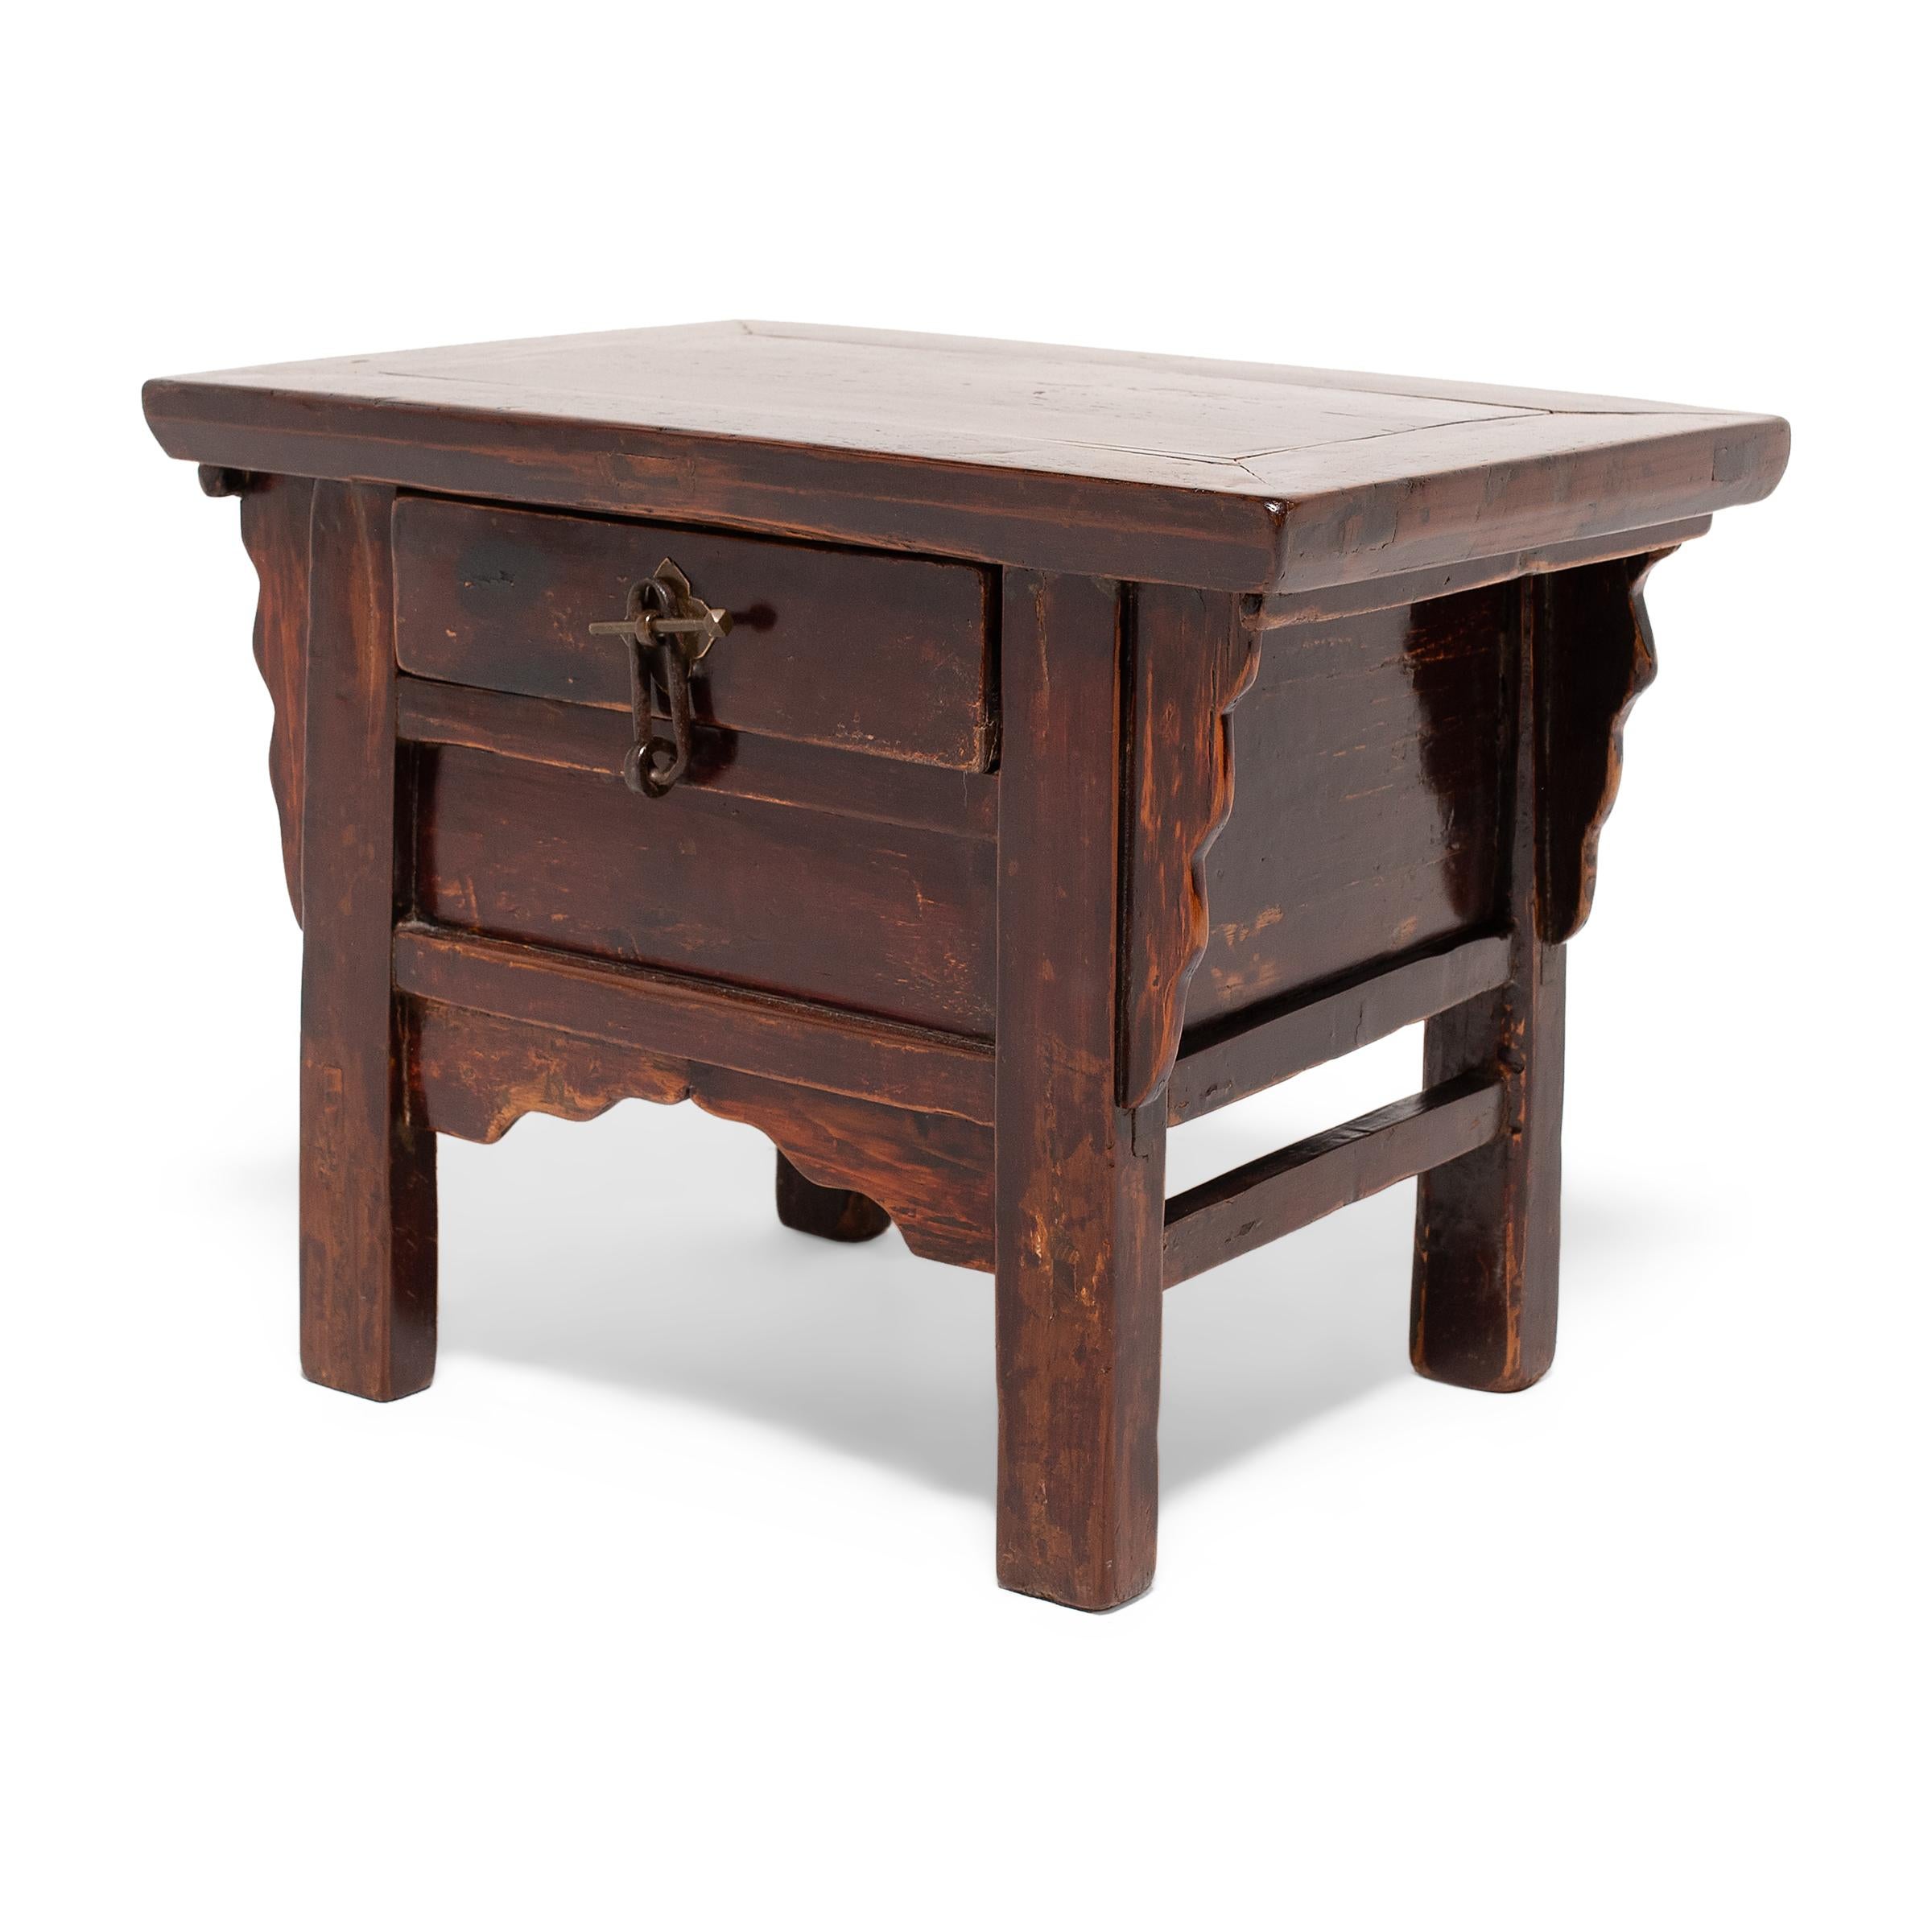 Perfectly proportioned for its petite size, this low elmwood chest is the ideal place to stow odds and ends. The charming cabinet has all the features of a traditional Chinese coffer - straight recessed legs, curving spandrels, and a floating-panel